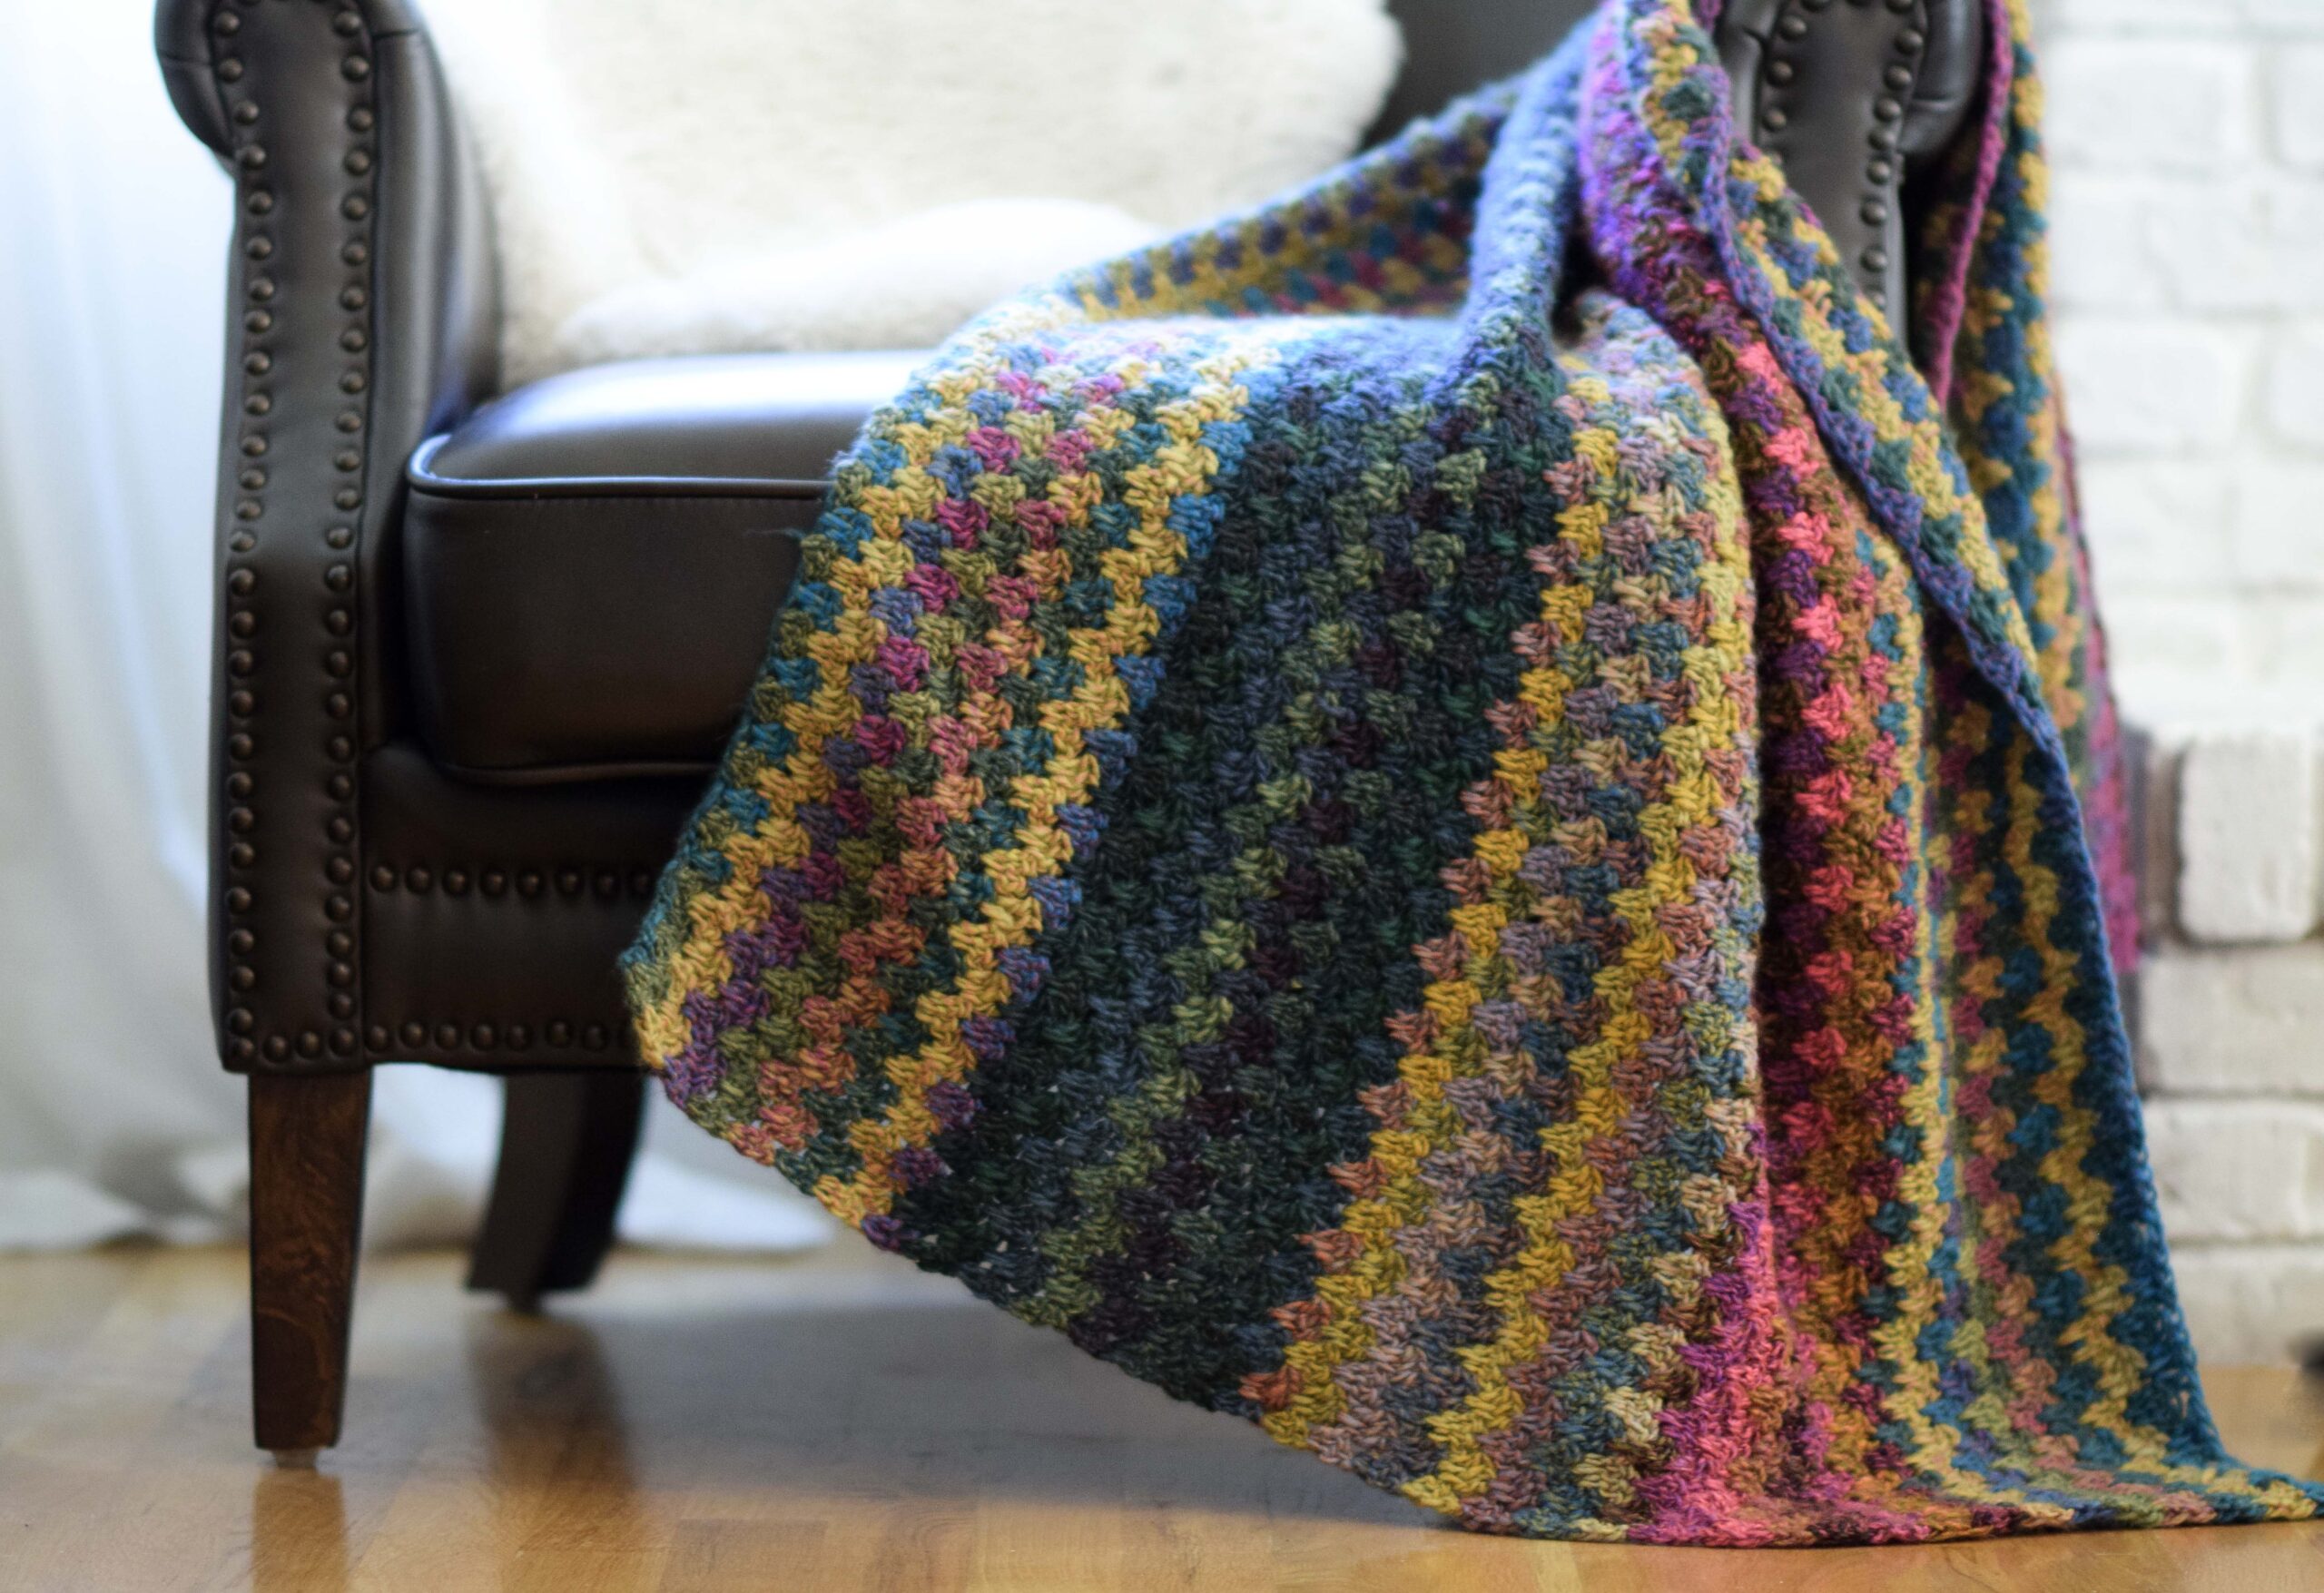 Mountain Throw Colorful Blanket Crochet Pattern